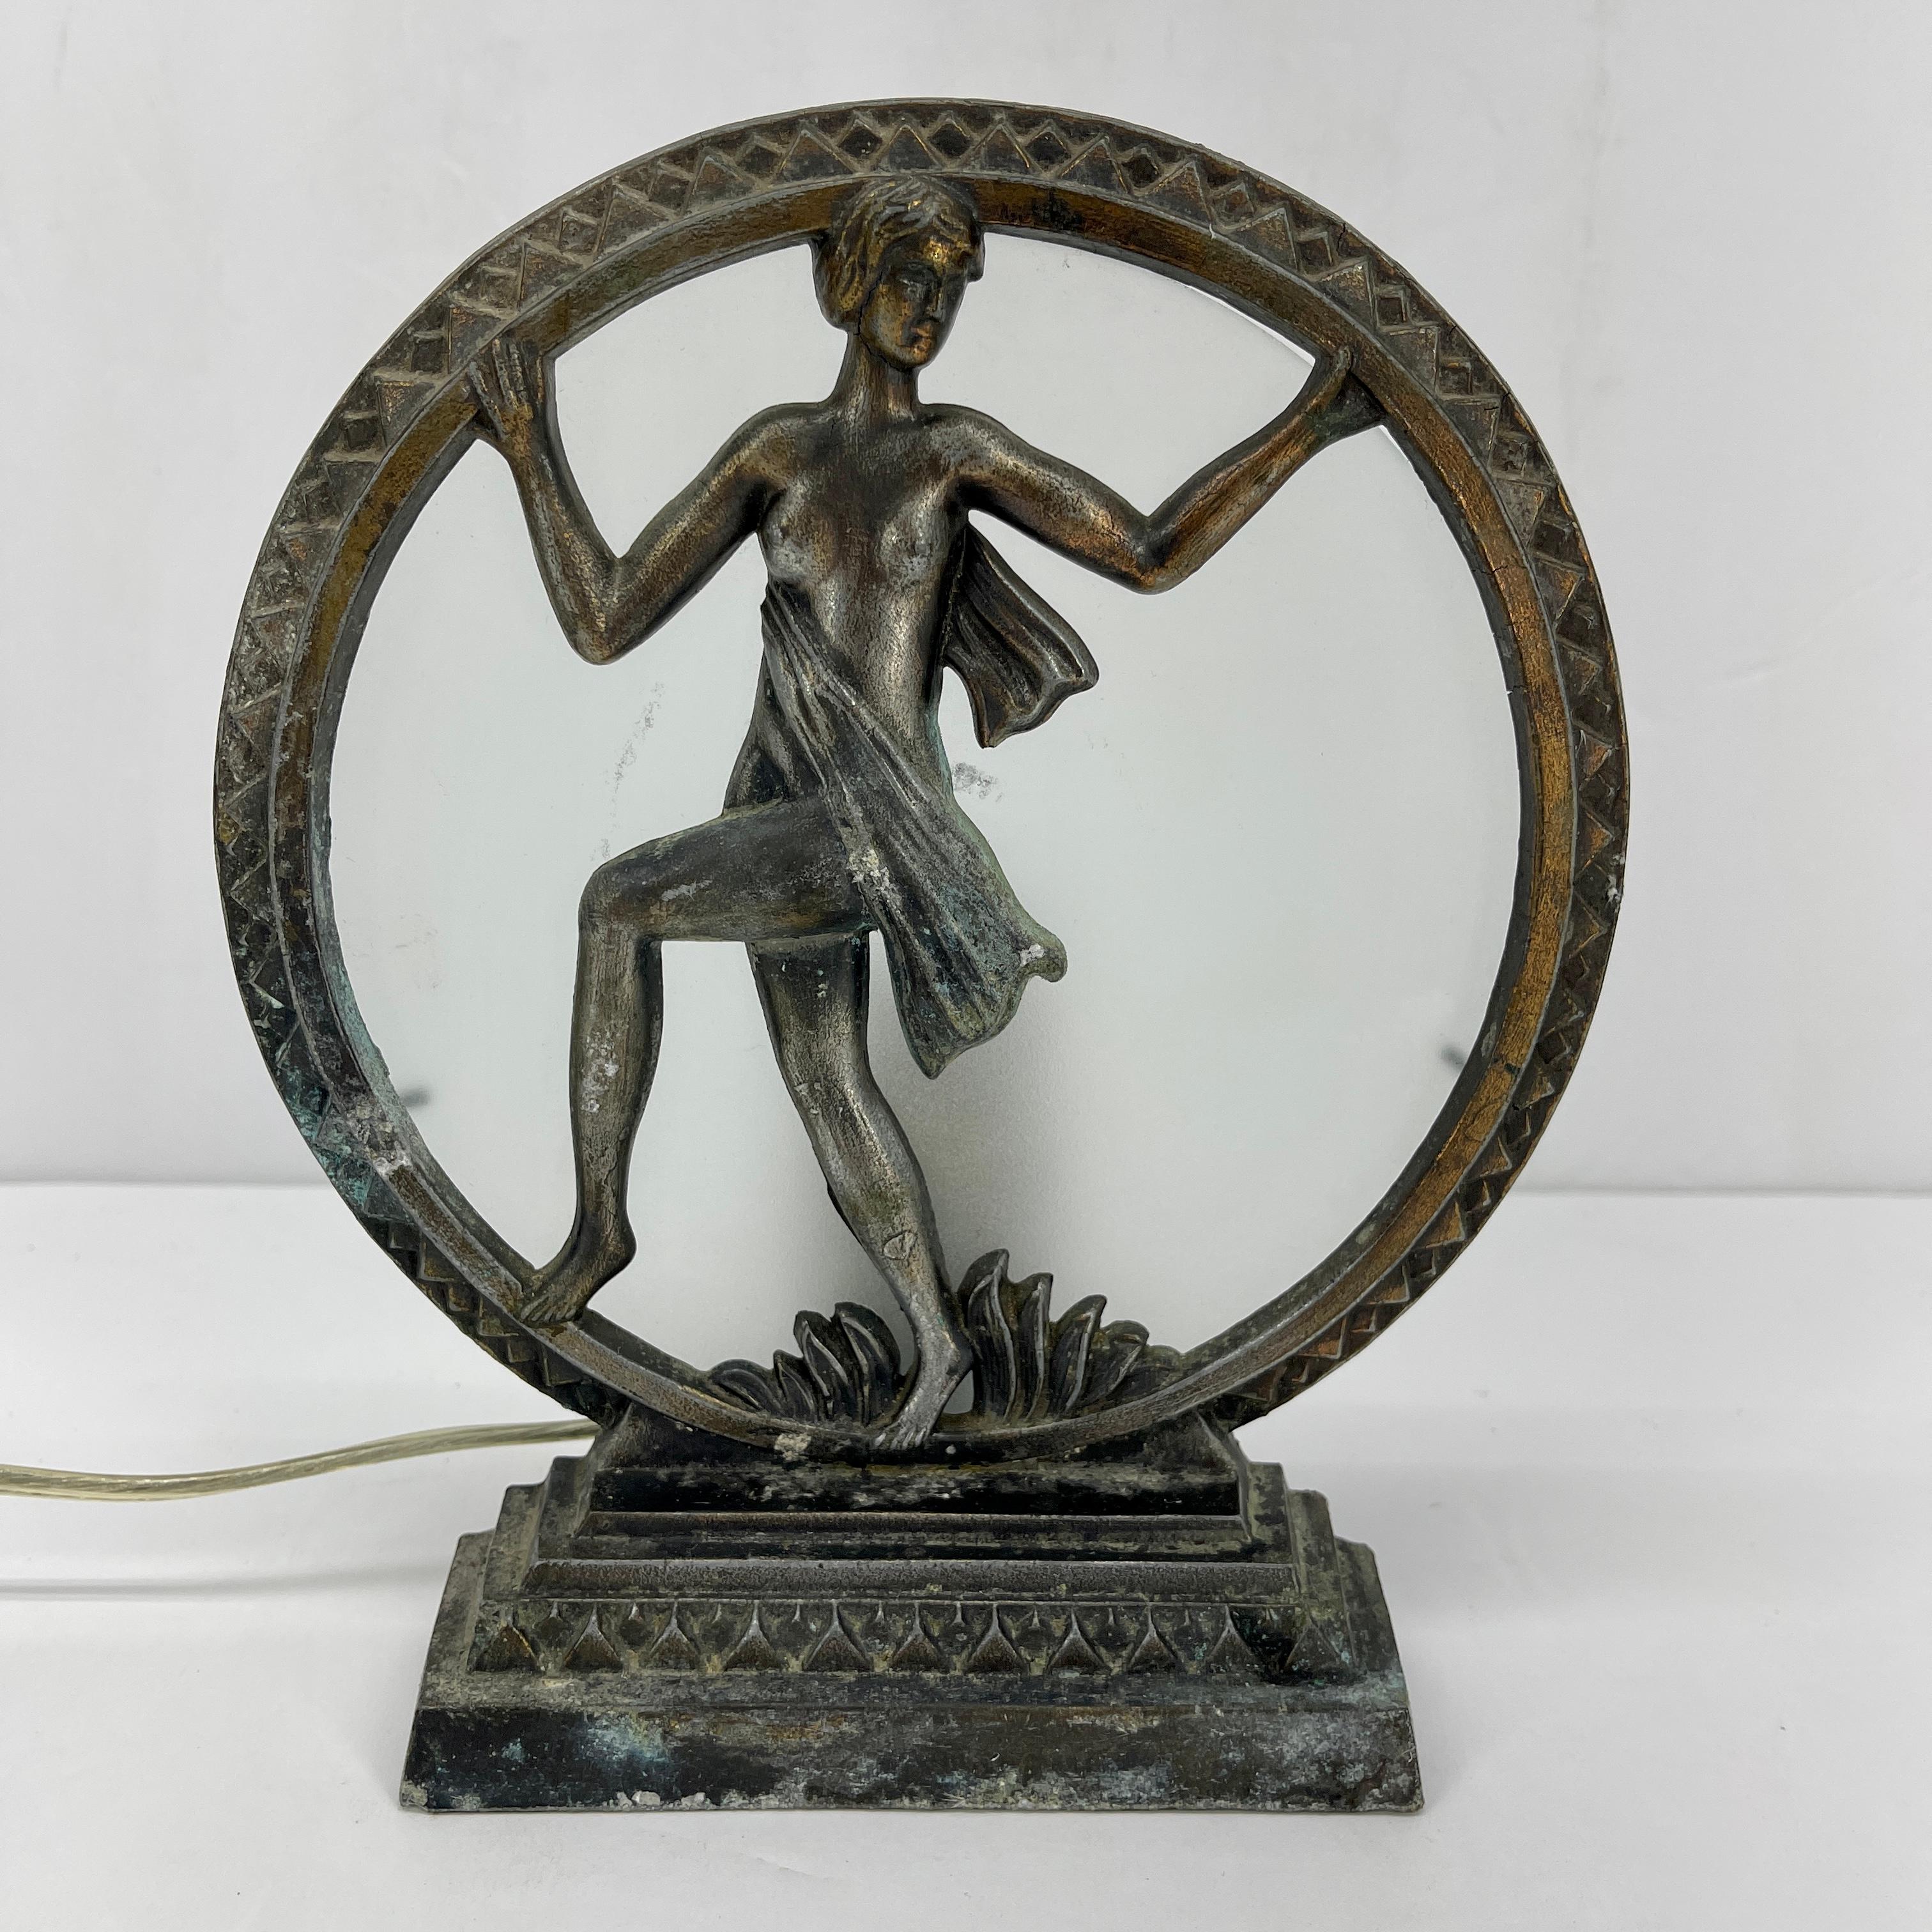 Art Nouveau figural woman table lamp. This beautiful petite lamp is a classic piece of Art Nouveau design. The nude woman graces with elegant the front of the lamp with circular glass behind her. The light shines from the back enhancing her beauty.